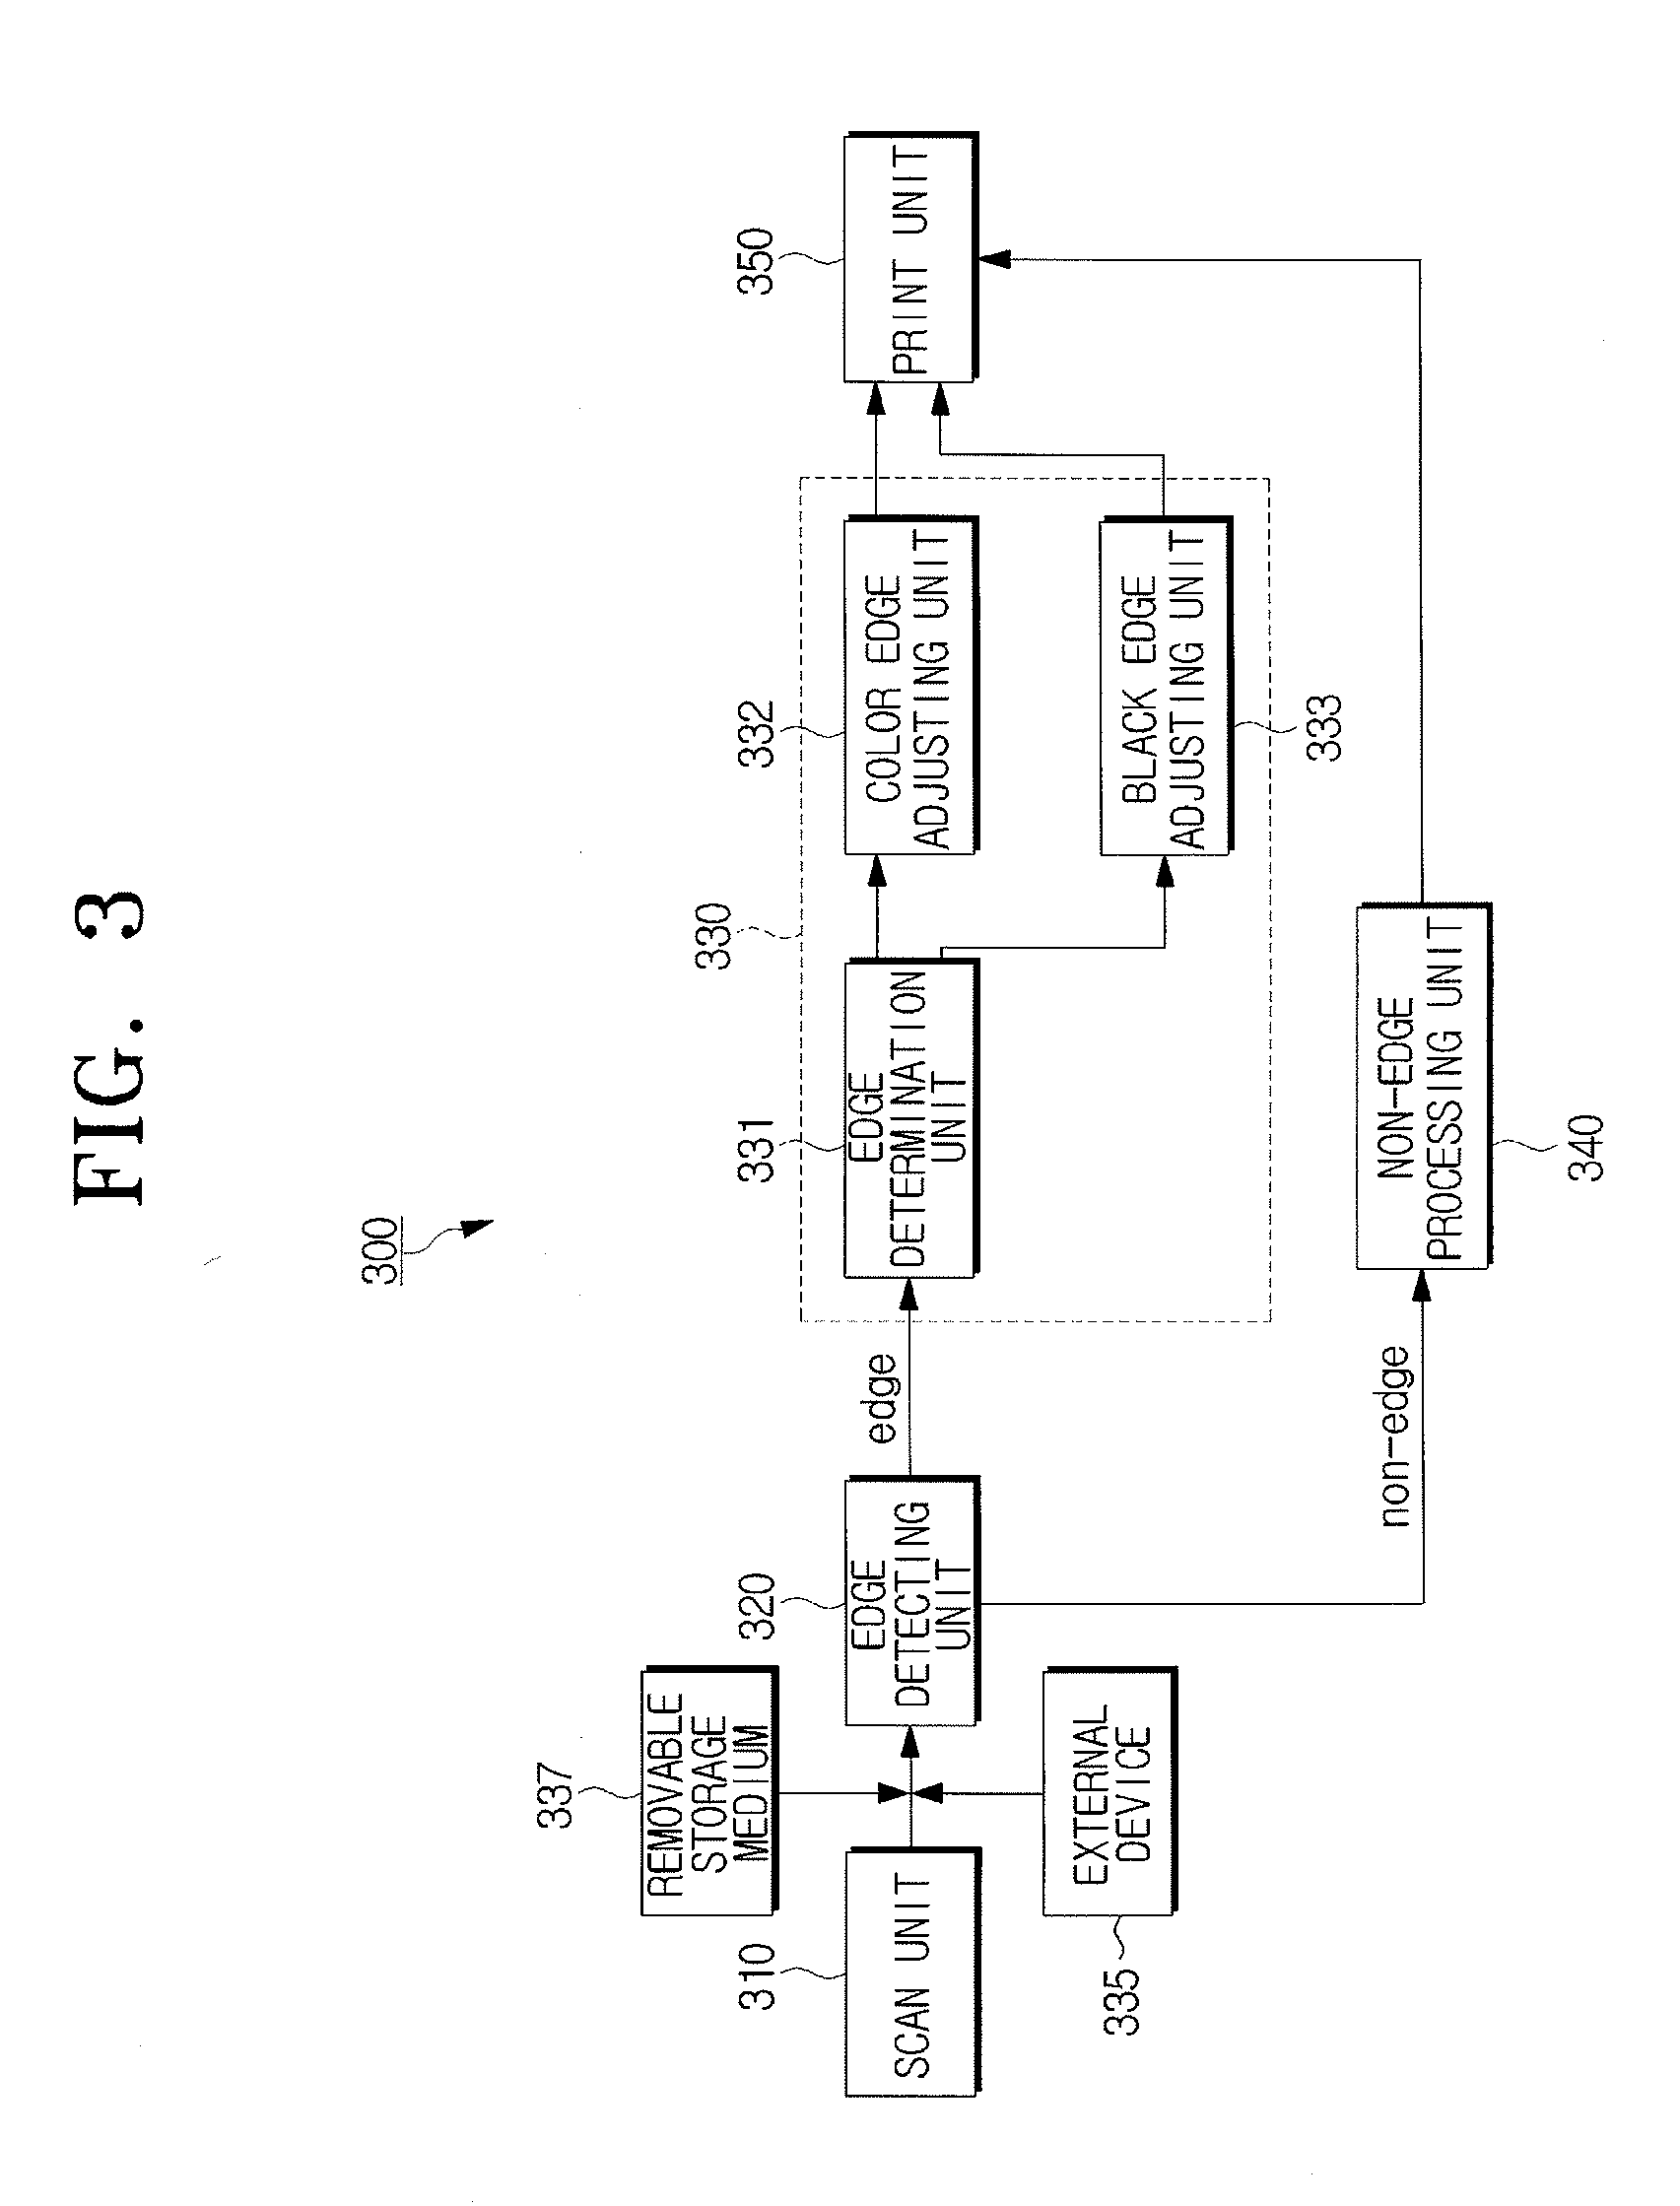 Image forming apparatus and a control method to improve image quality